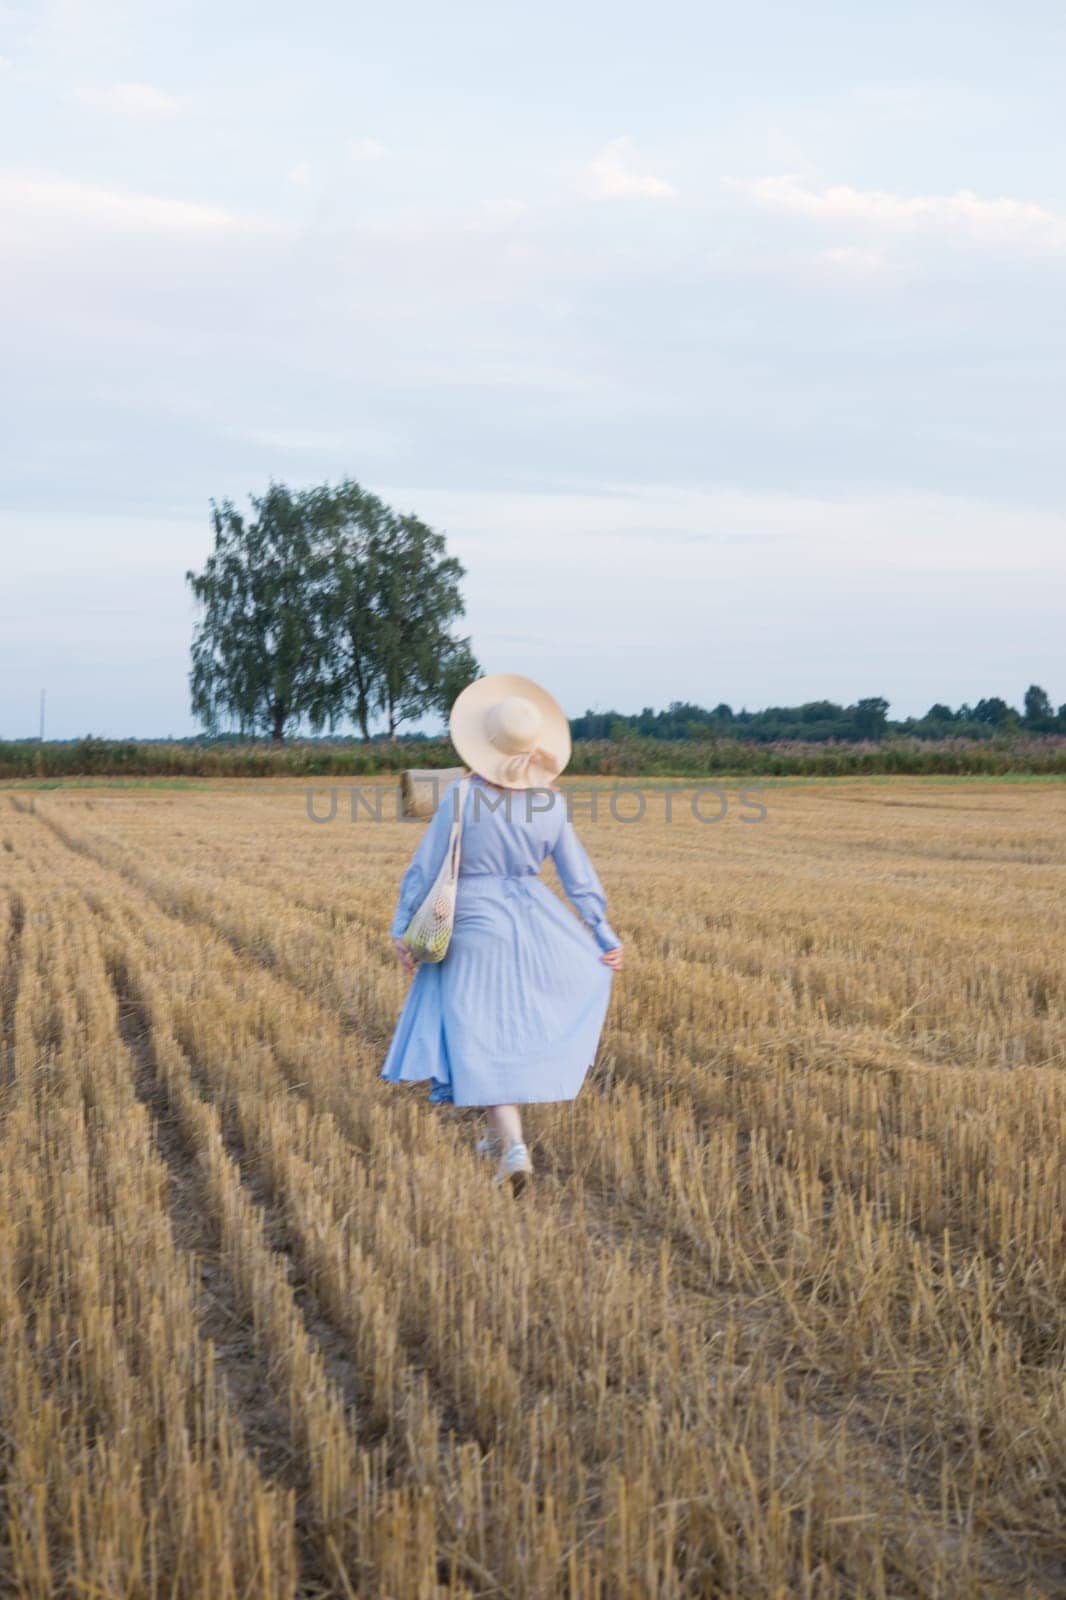 A red-haired woman in a hat and a blue dress walks in a field with haystacks